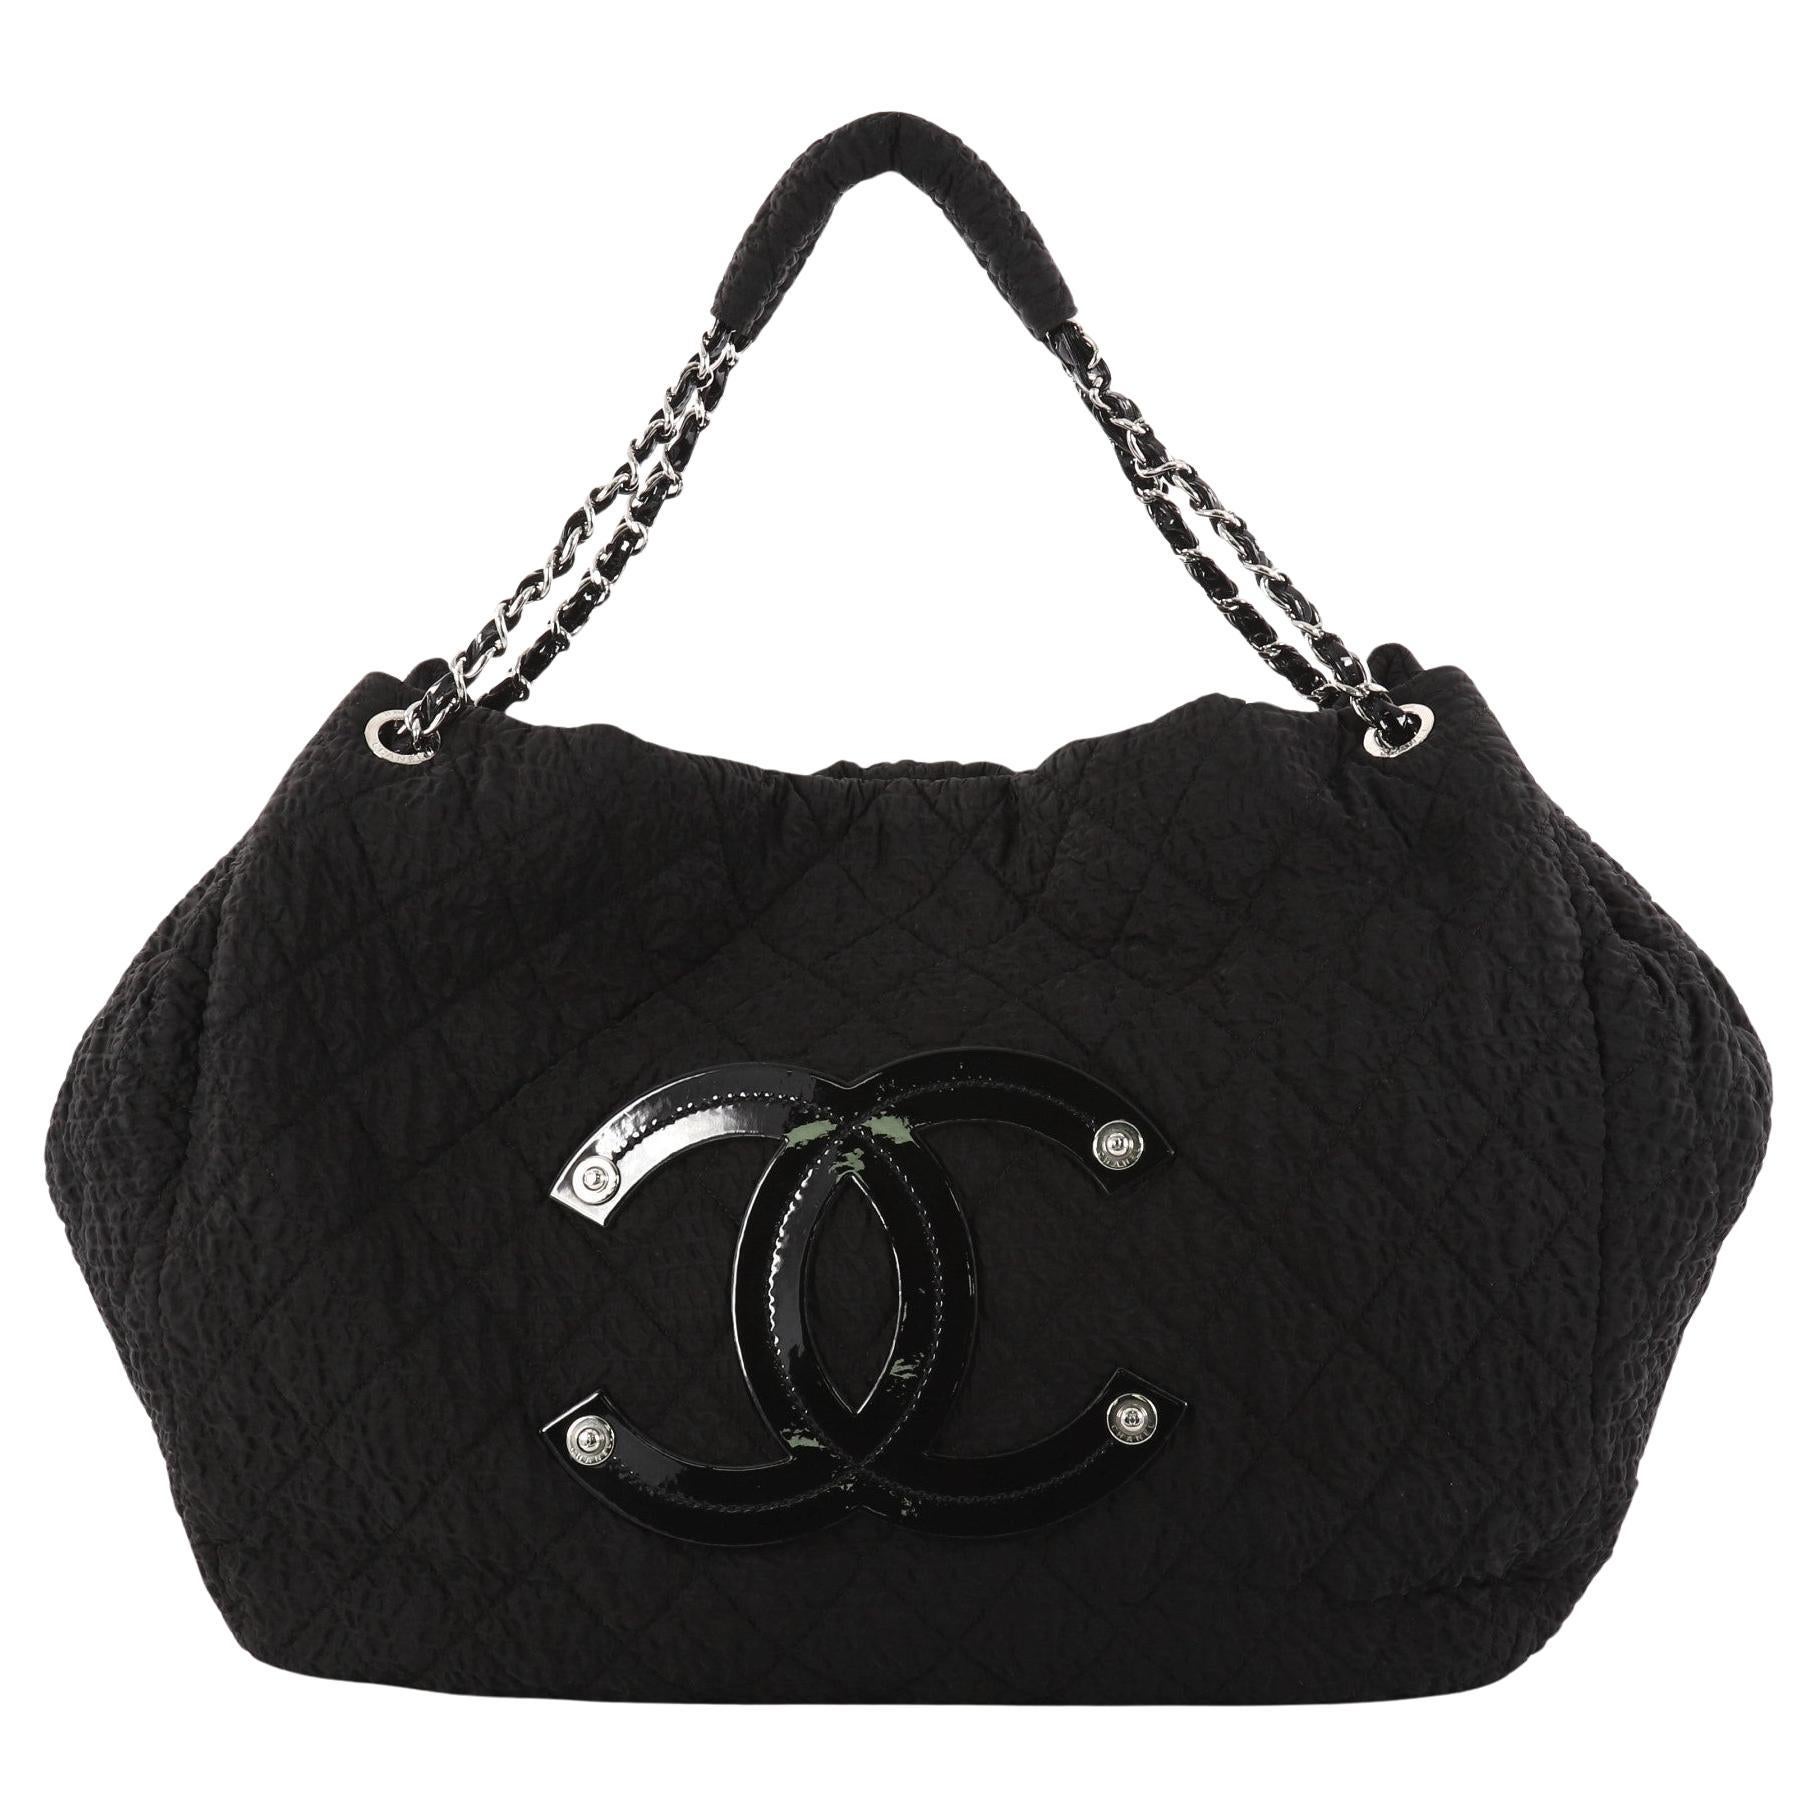 Chanel Coco Cabas Cabas Overnight Tote Black Microfiber Nylon Weekend Bag For Sale